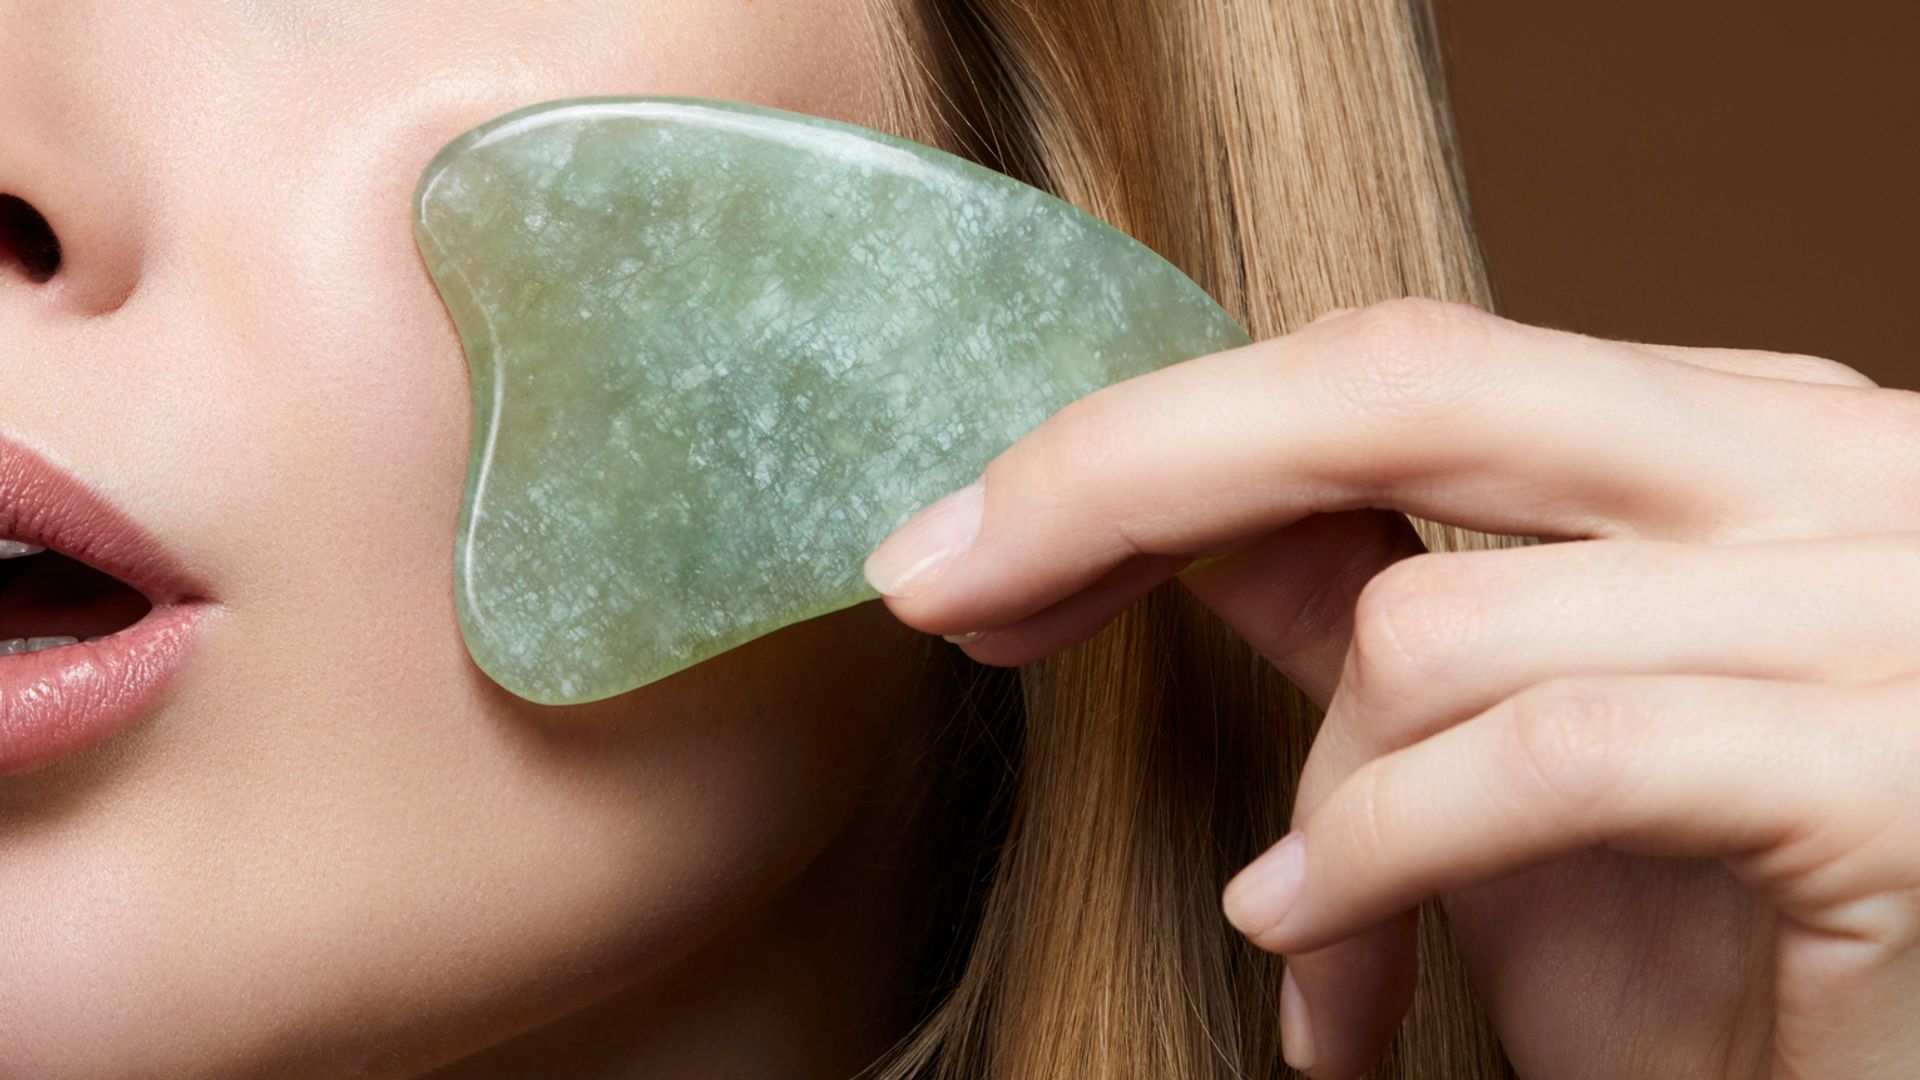 woman massaging her face to avoid wrinkles with a scraping jade Gua Sha Massage tool- asian skin care beauty trend